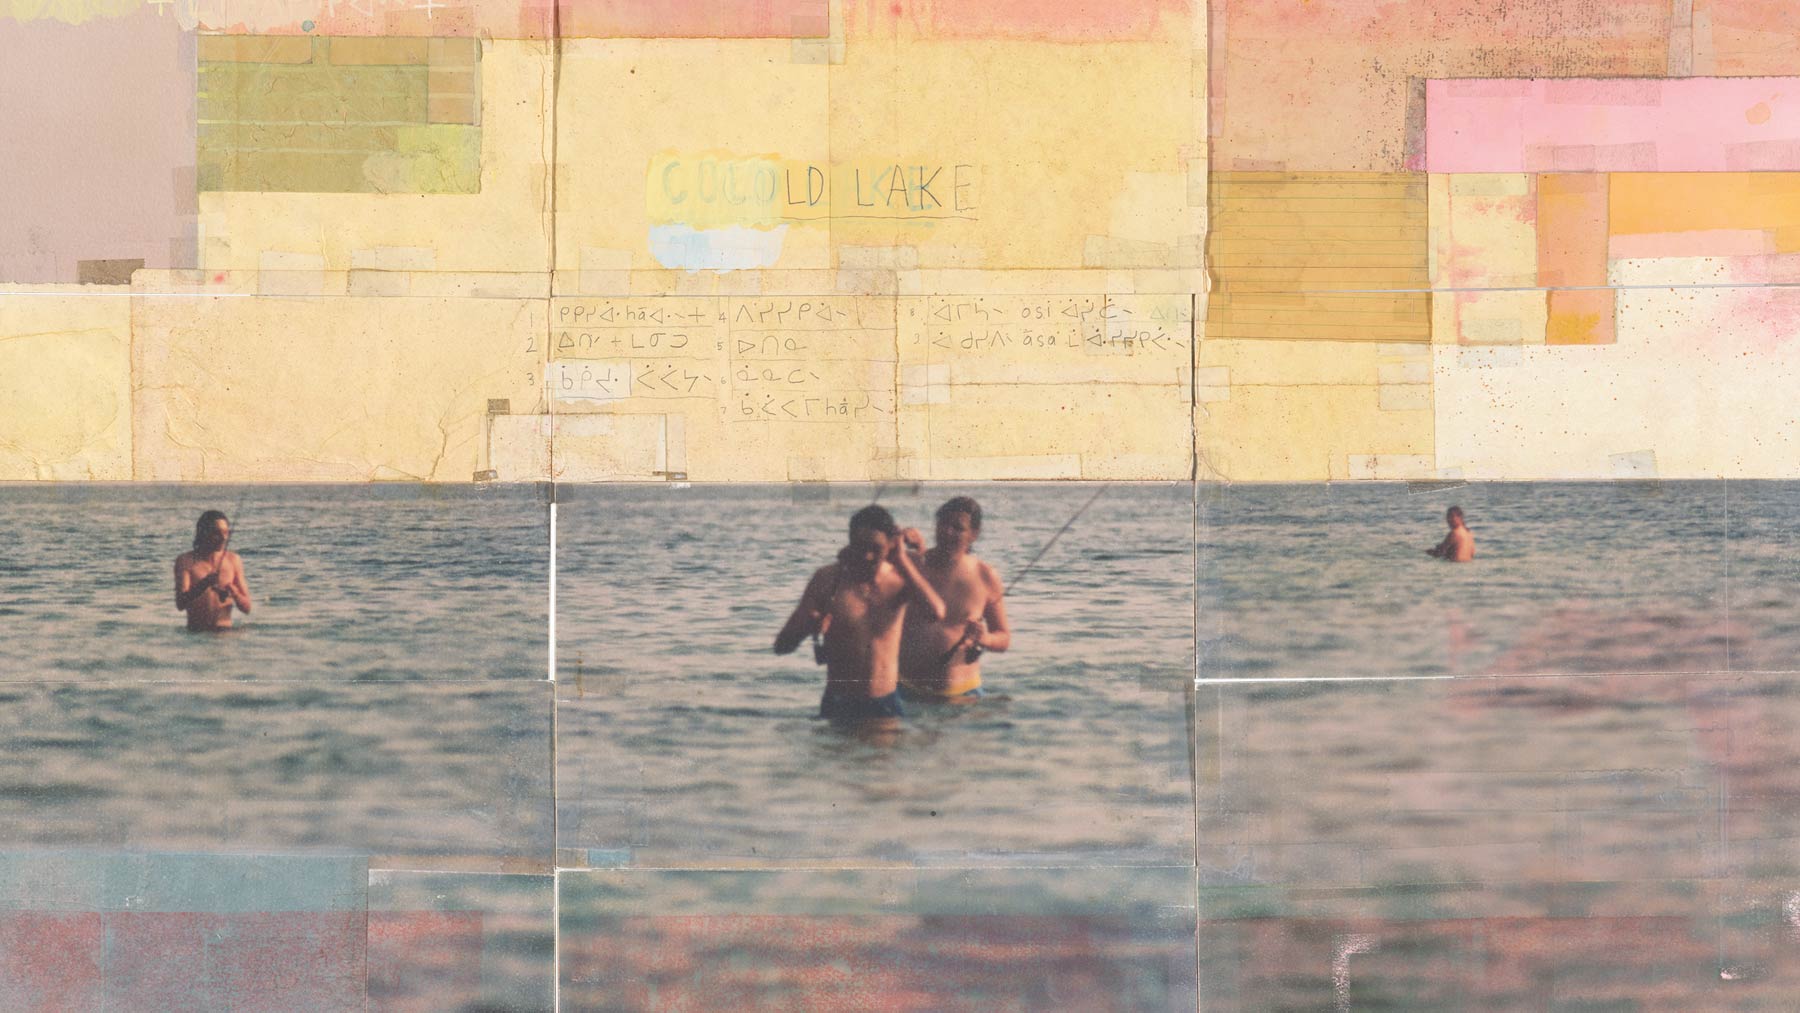 Collage-style photo of three people in the ocean